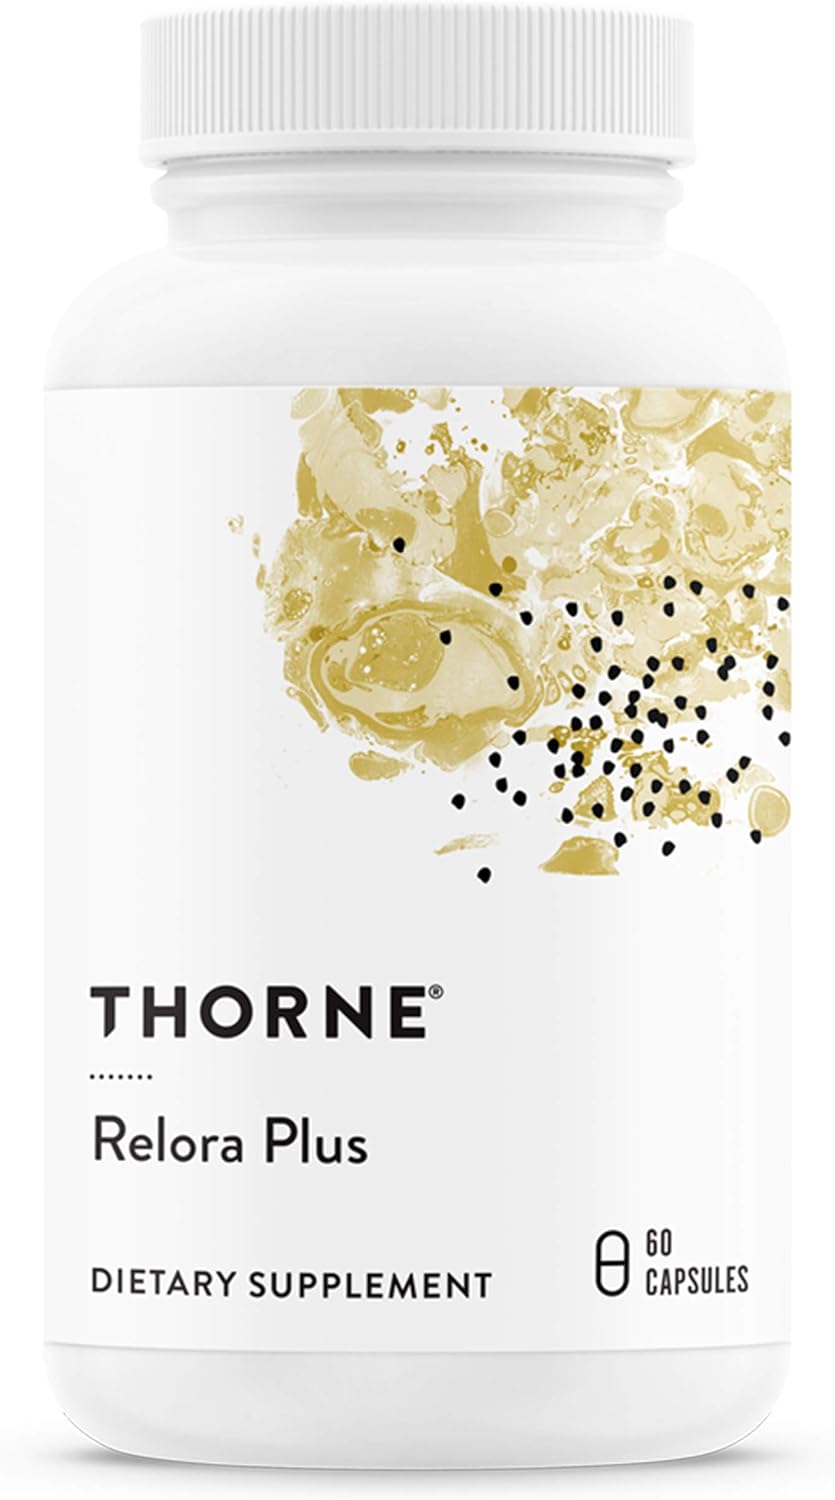 Thorne Relora Plus - Blend of Botanicals with 6 B Vitamins to Support Restful Sleep, Balances Cortisol and DHEA Levels - 60 Capsules - 30 Servings